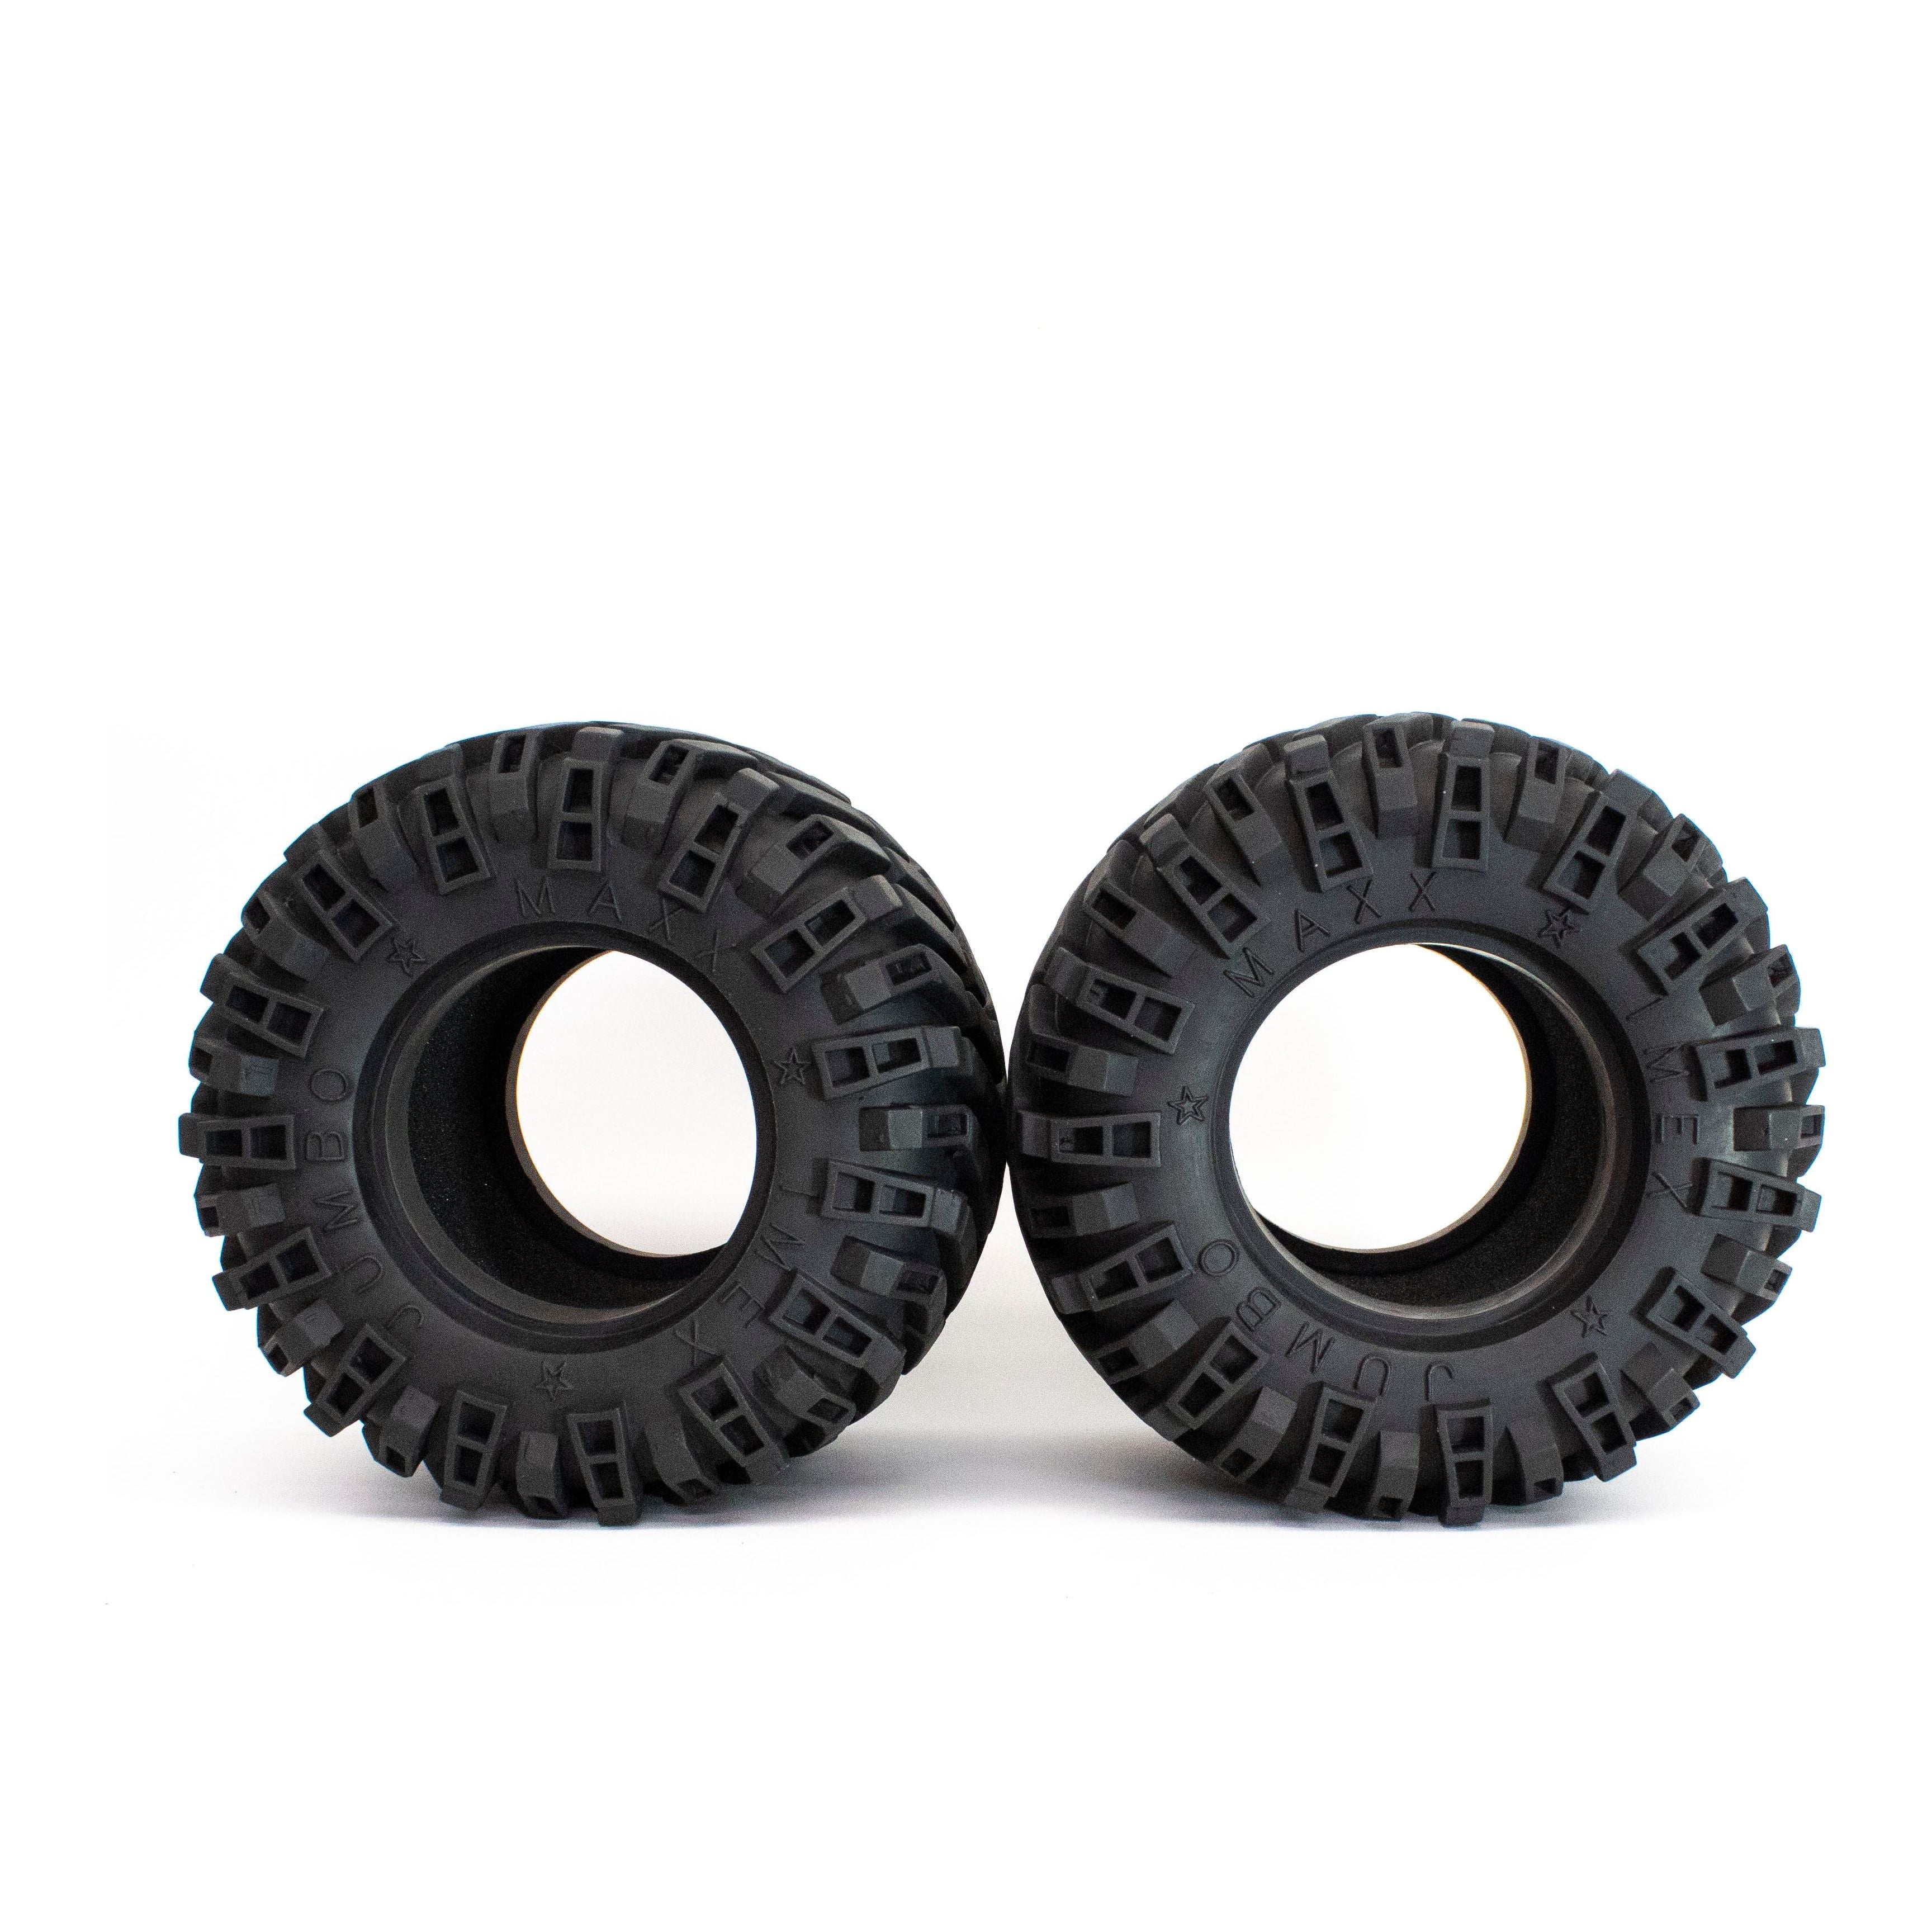 IMEX Jumbo Claw Dawg Monster Truck Tires (1 Pair)